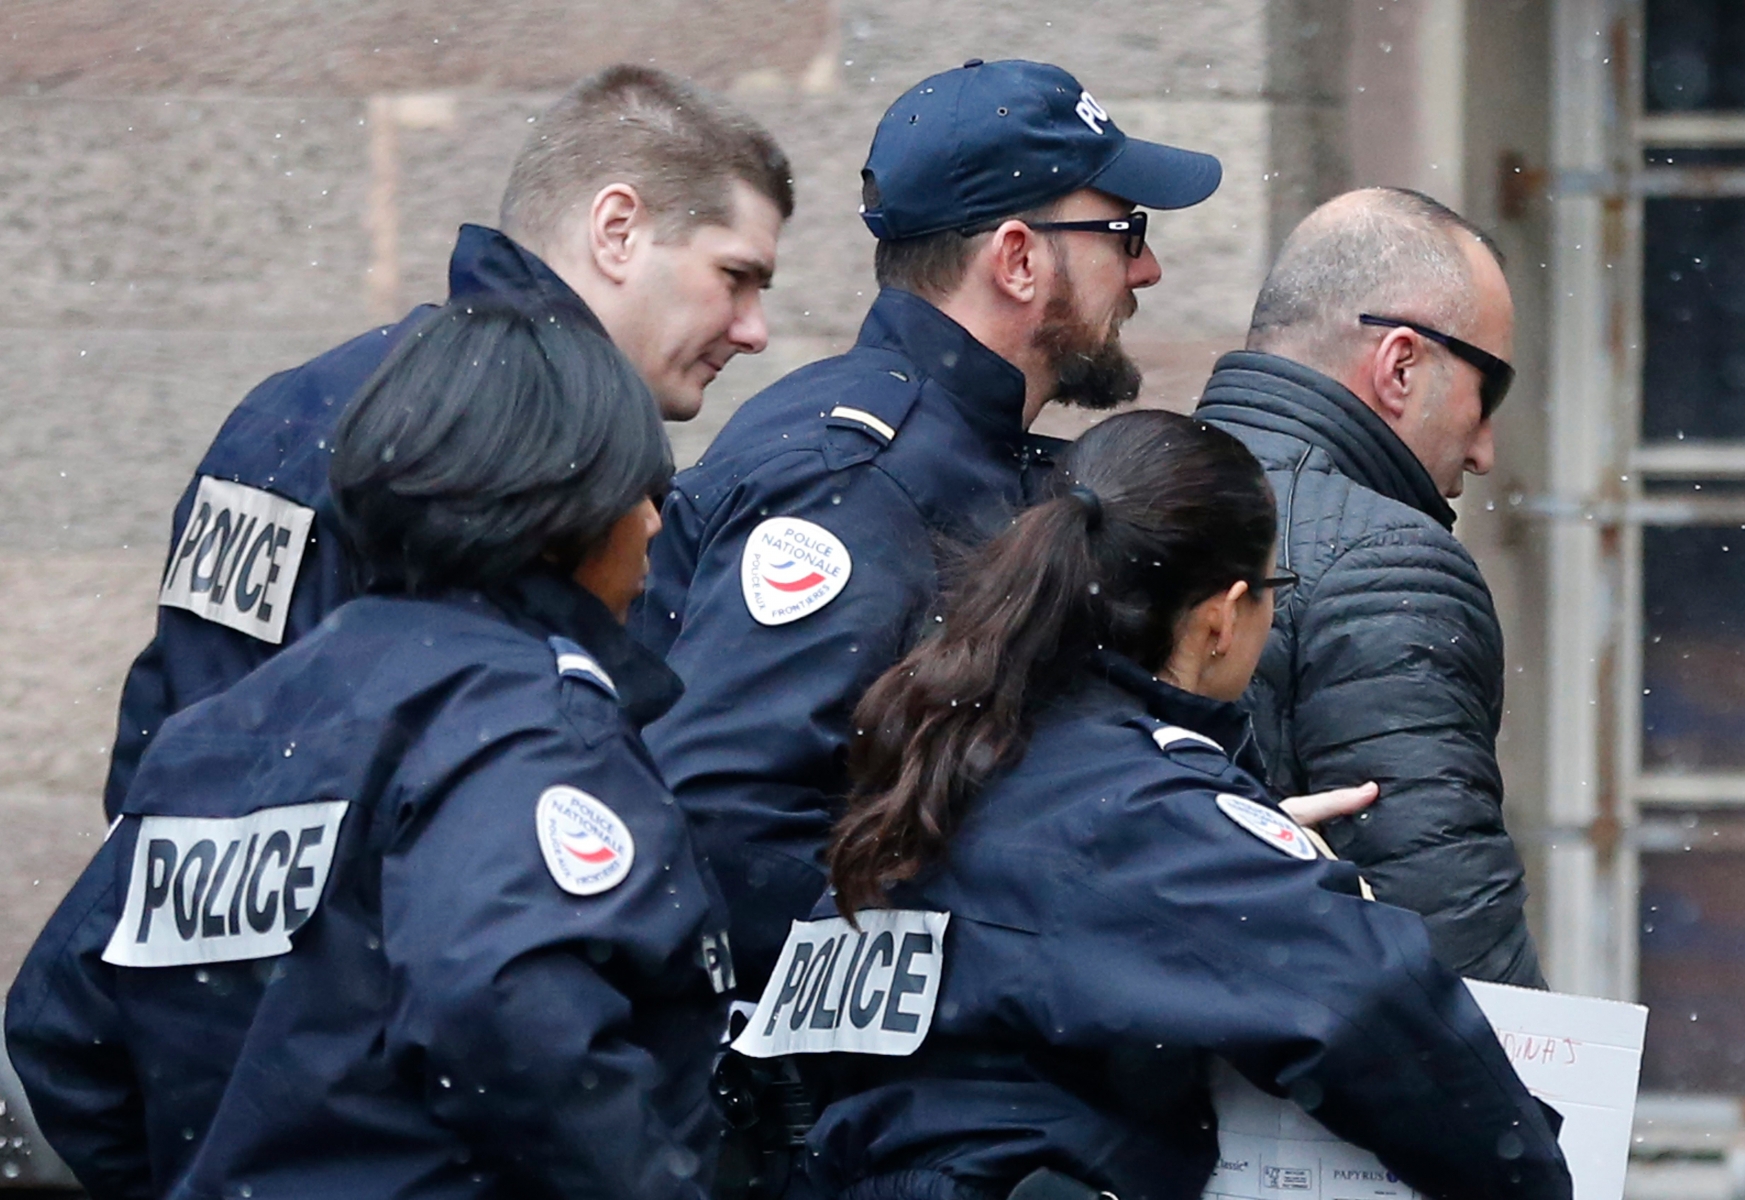 Former Kosovo prime minister Ramush Haradinaj, right, is rushed by police officers inside the Colmar courthouse, eastern France, Thursday Jan.5, 2017. Haradinaj is facing possible extradition to Serbia to face war crimes charges after being arrested at a French airport. (AP Photo/Jean-Francois Badias) France Kosovo